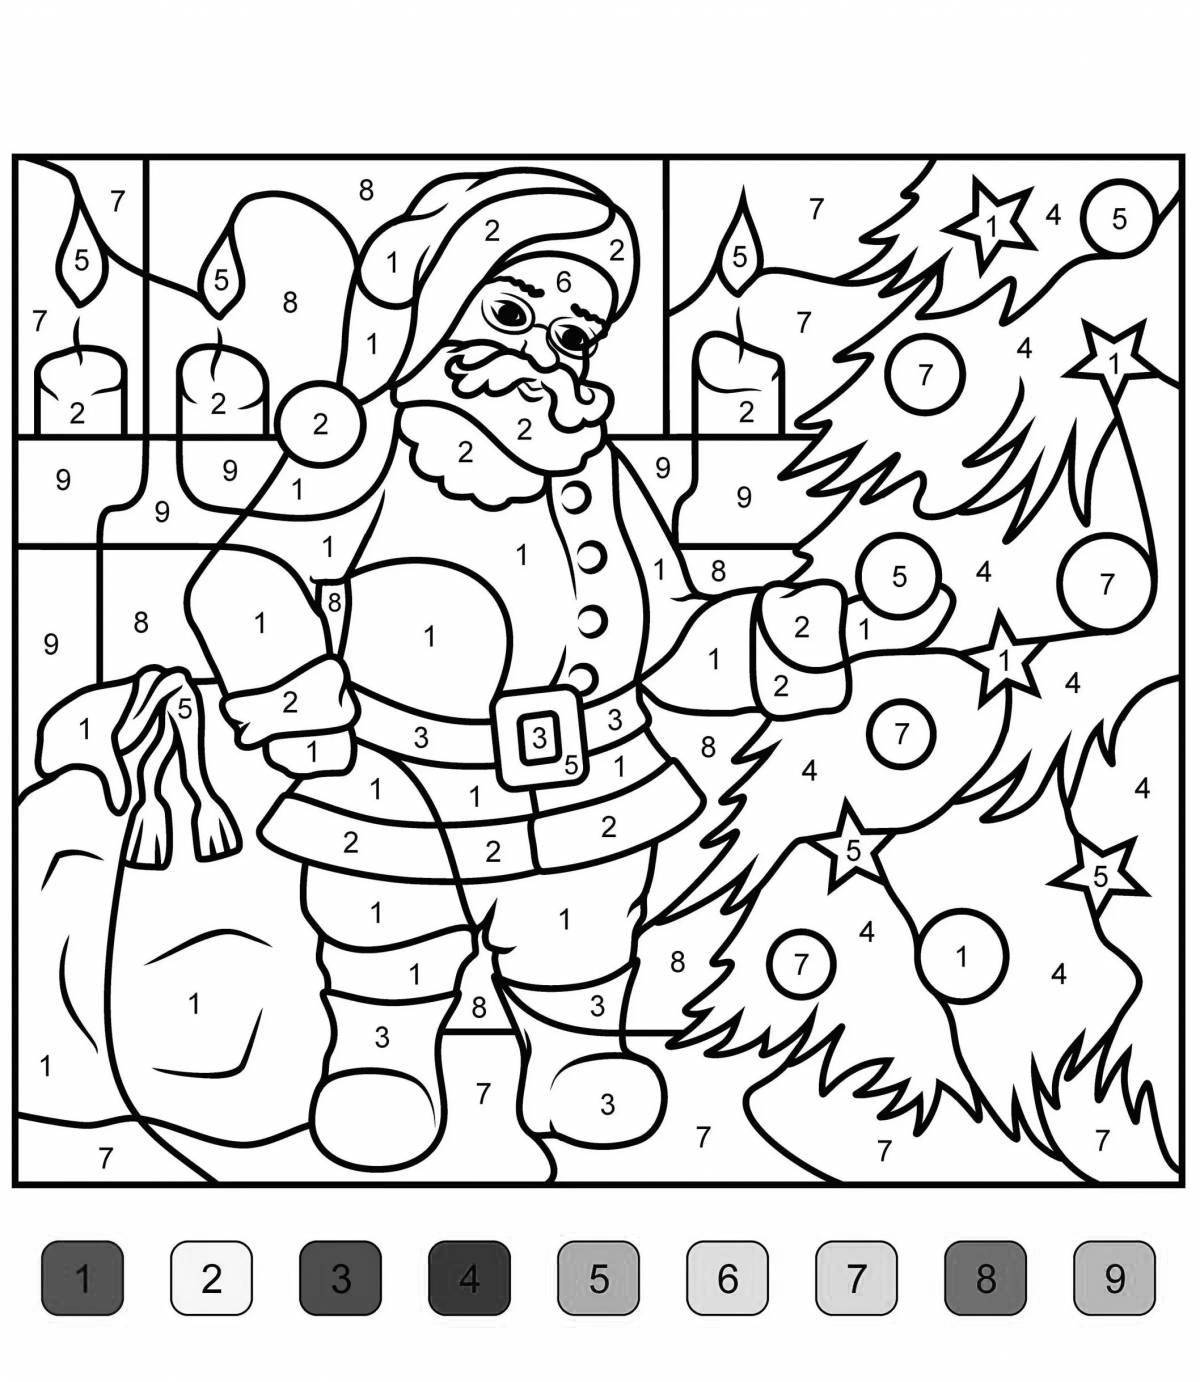 Rampant snowman coloring by numbers